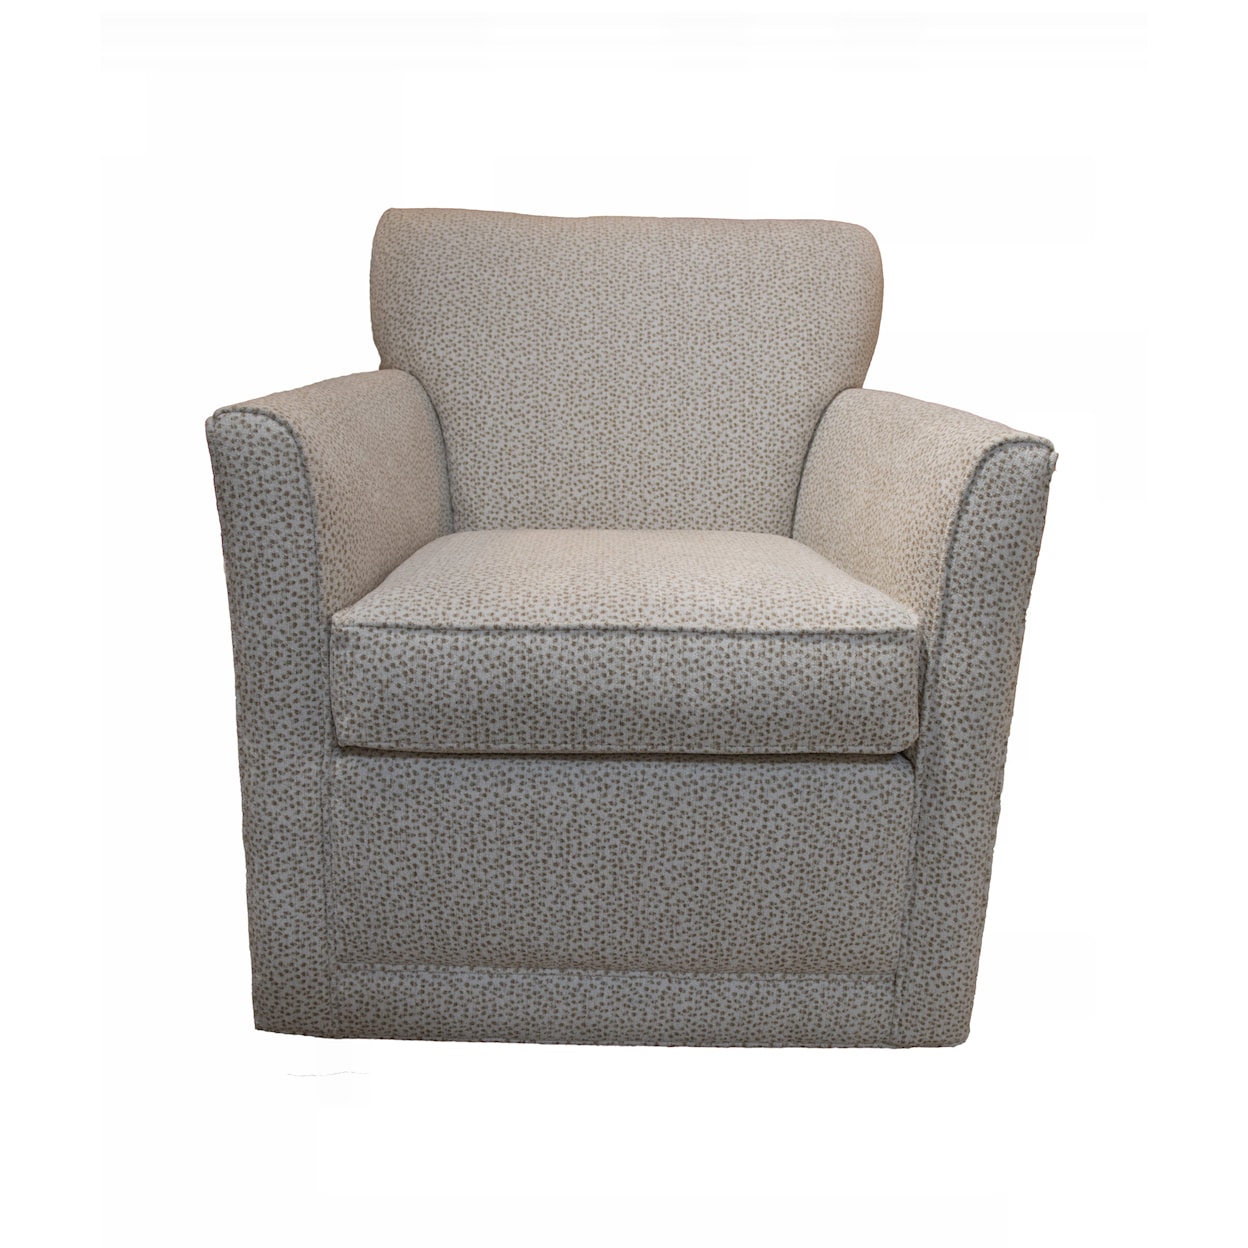 Rowe Times Square Upholstered Swivel Chair